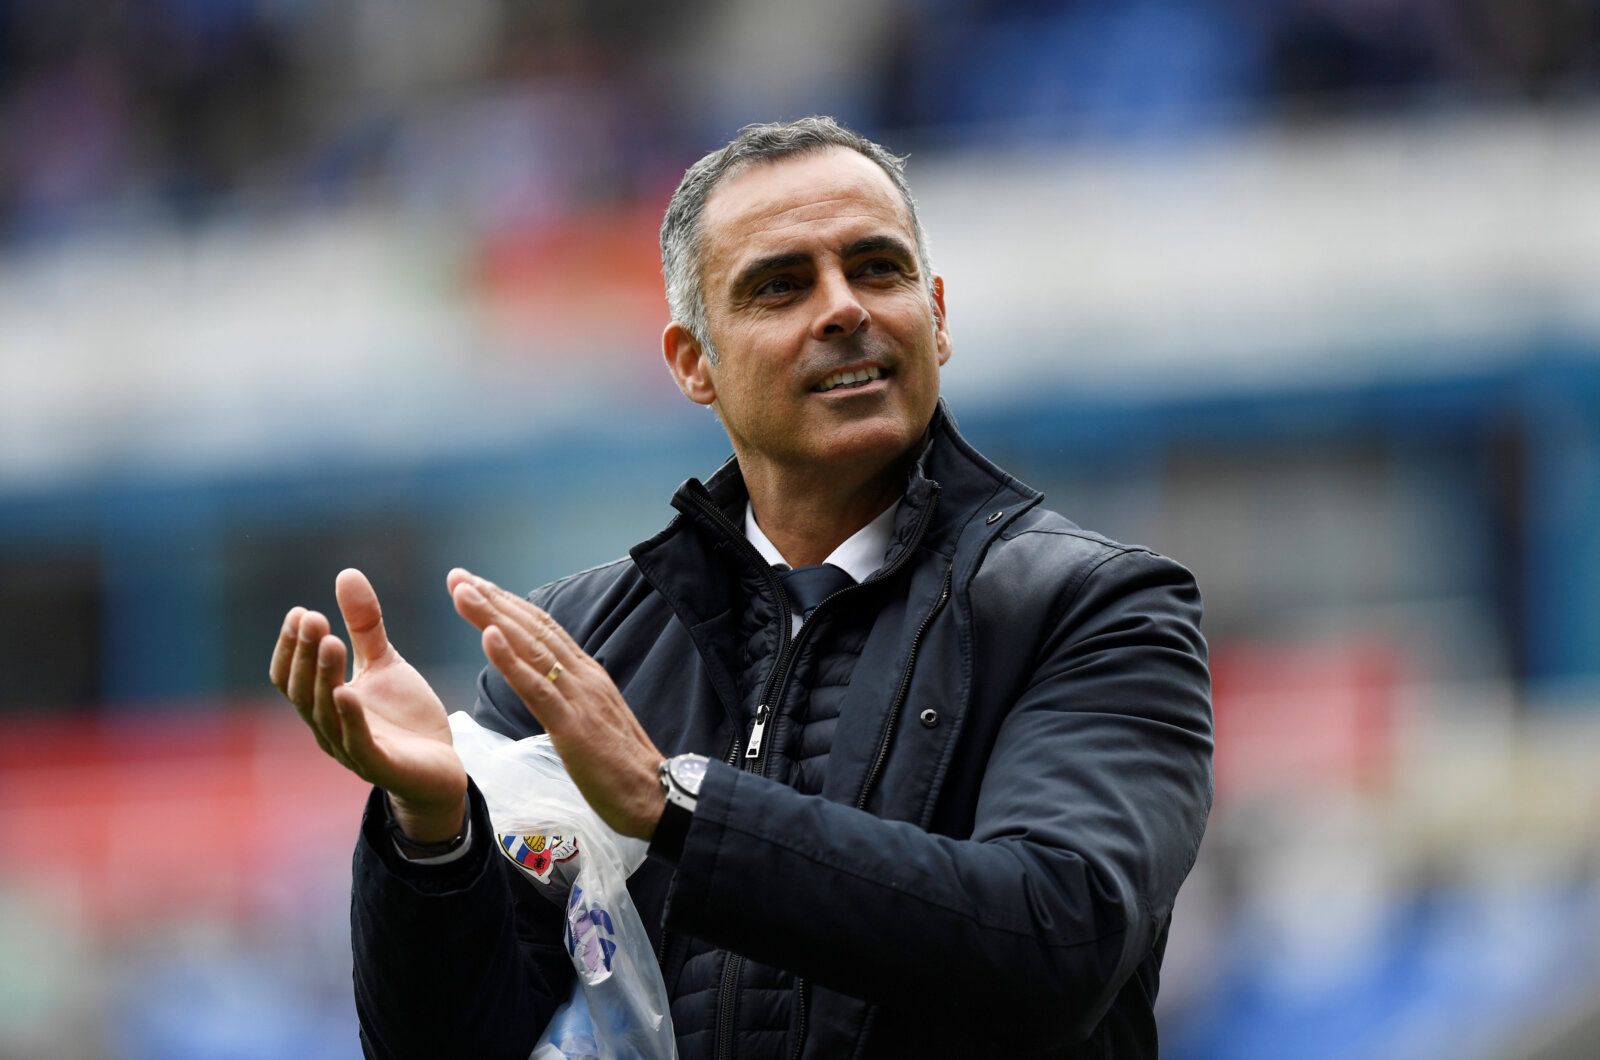 Soccer Football - Championship - Reading v Birmingham City - Madejski Stadium, Reading, Britain - May 5, 2019  Reading manager Jose Gomes applauds the fans after the match   Action Images/Tony O'Brien  EDITORIAL USE ONLY. No use with unauthorized audio, video, data, fixture lists, club/league logos or 